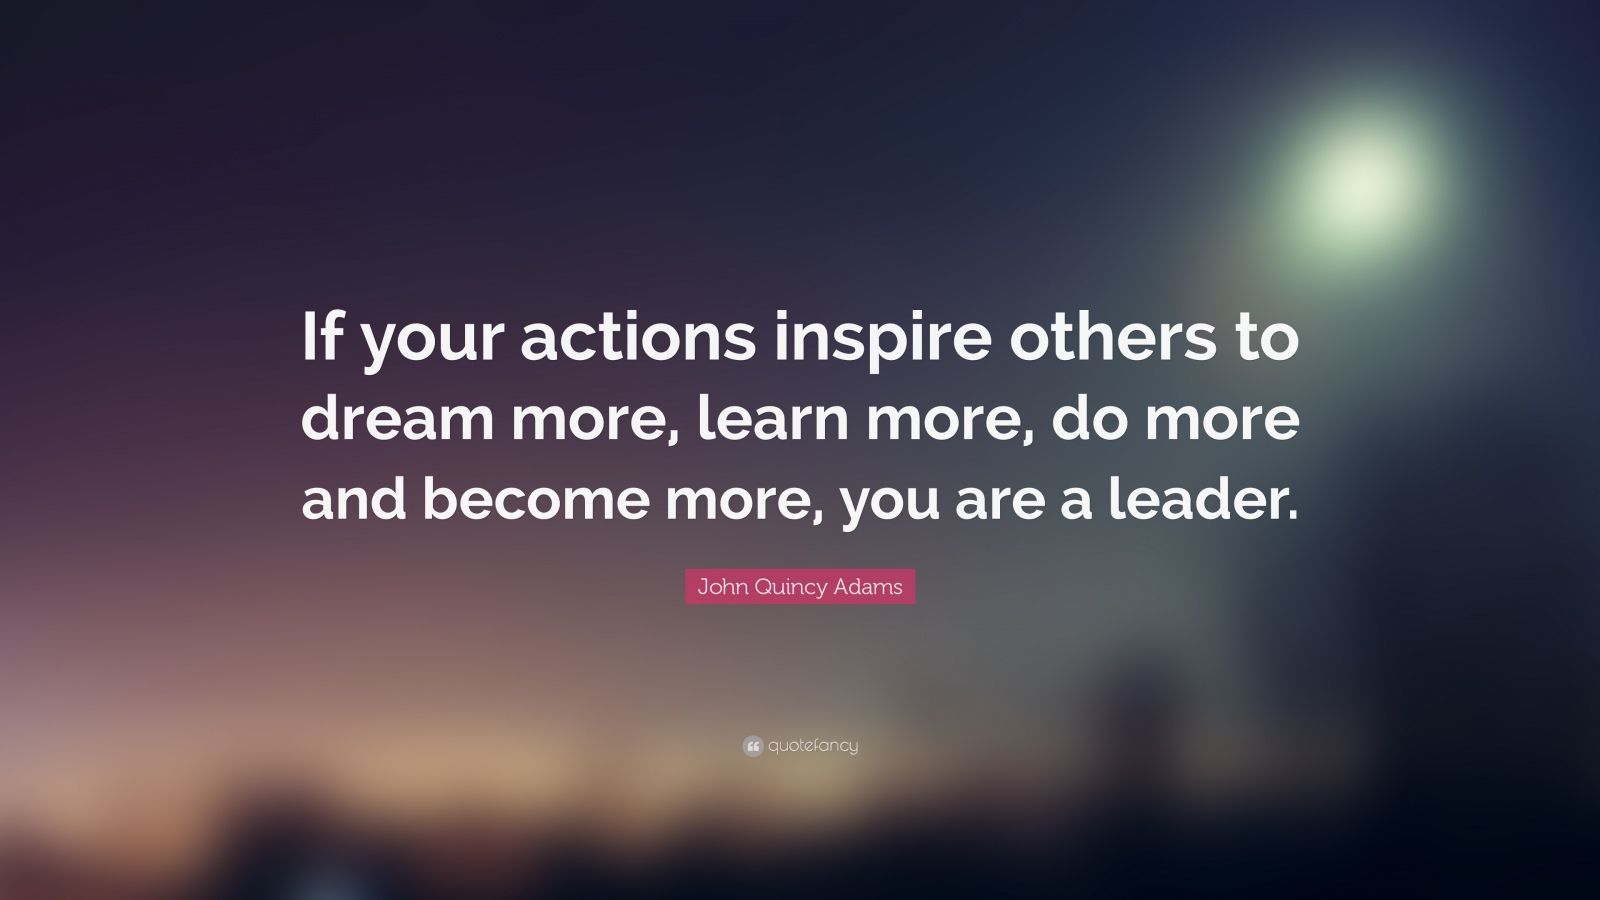 John Quincy Adams Quote: “If your actions inspire others to dream more ...